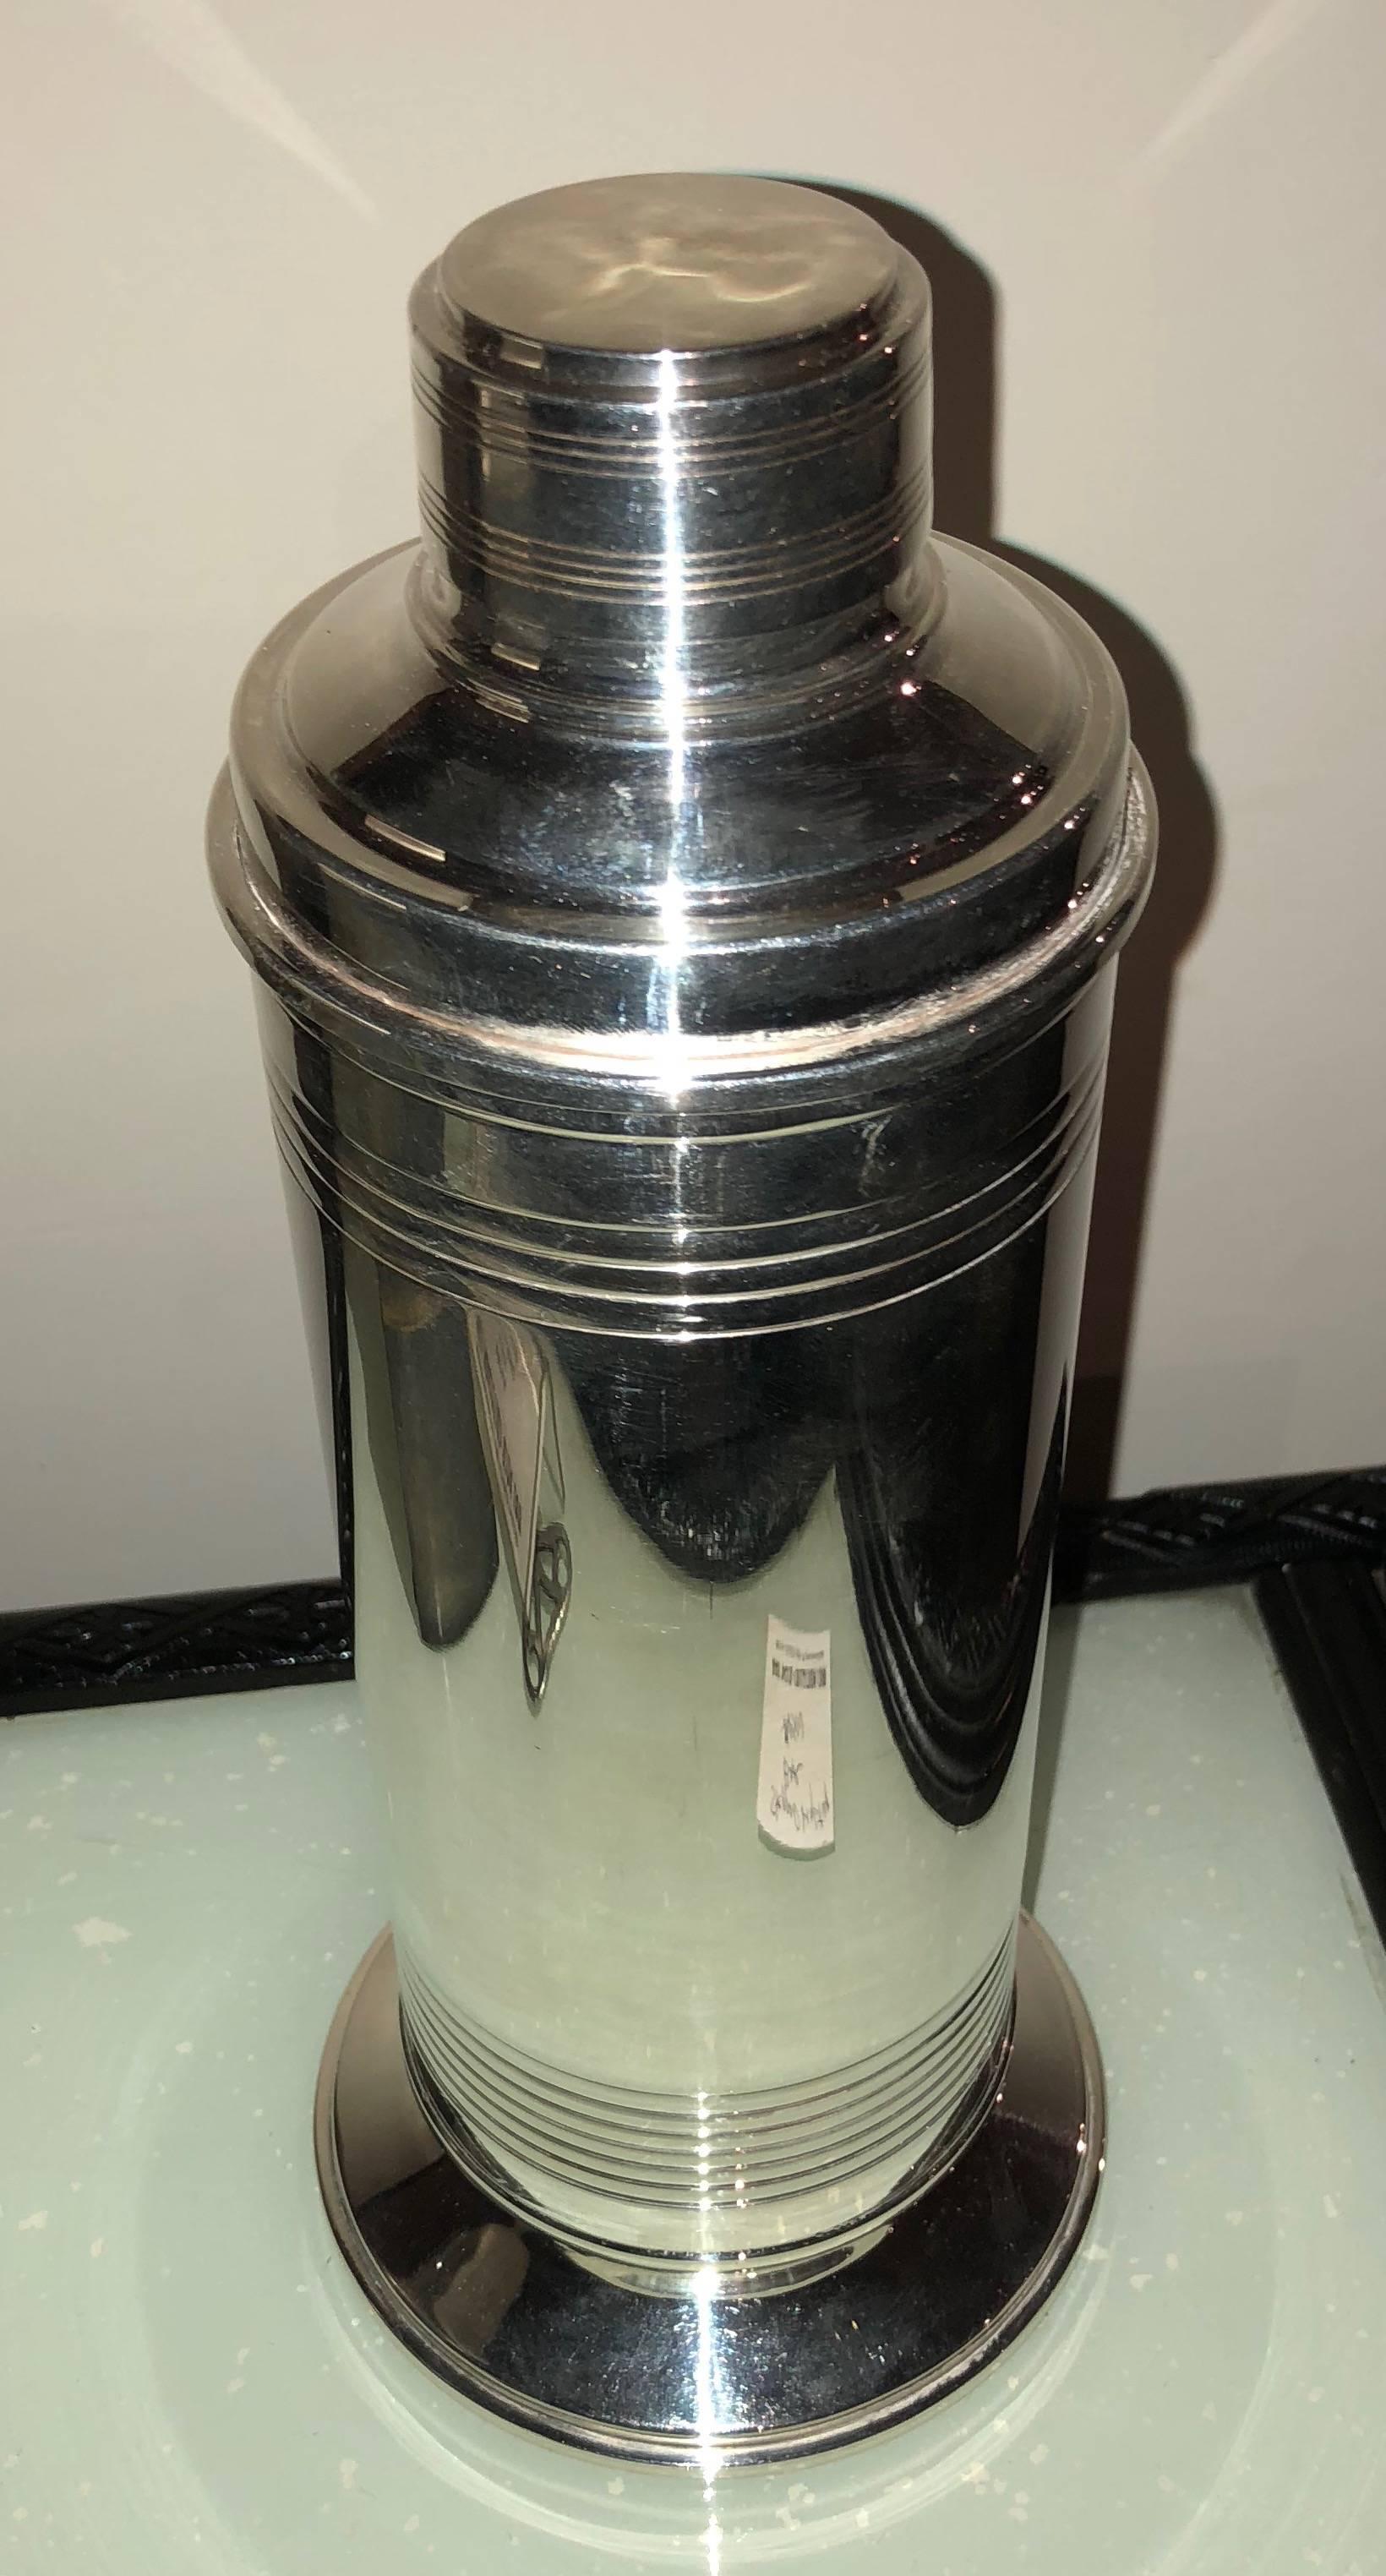 Modernist high quality English cocktail shaker in pristine restored condition. Unusual design with modern flair, concentric circle detail giving it a ribbed effect centered on a substantial footed based. Clear foundry marks on the bottom, certainly